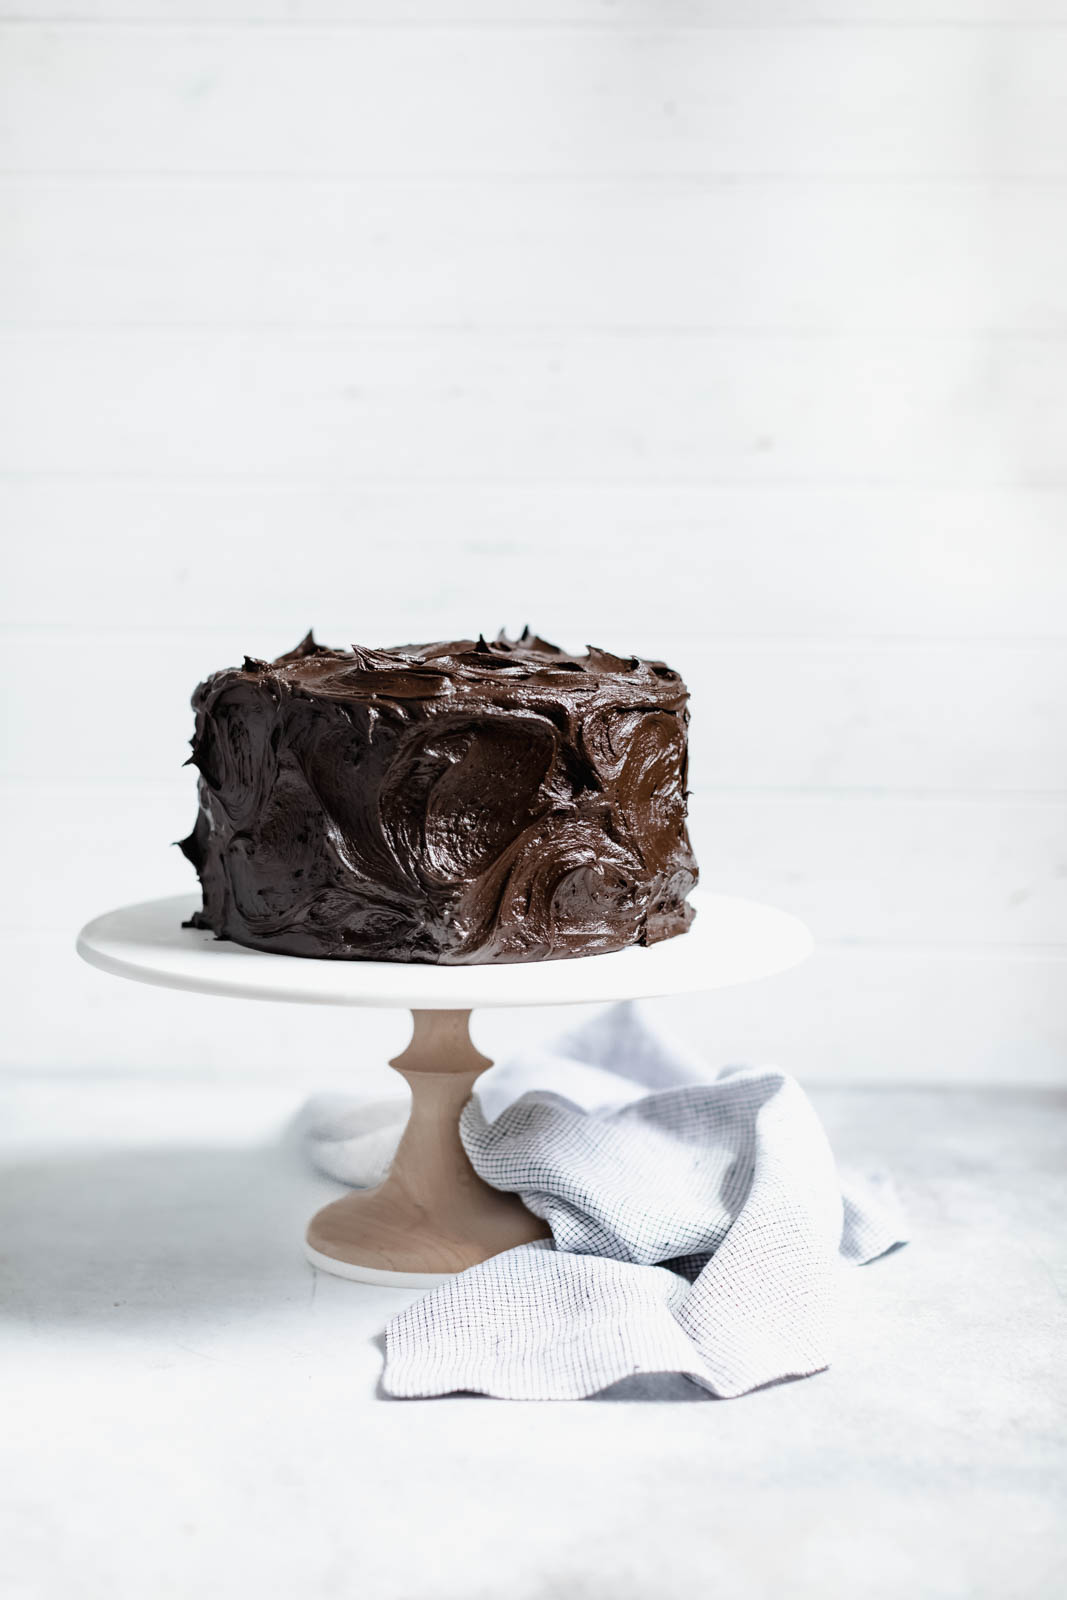 The Blackout Chocolate Cake to end all other chocolate cakes. Aka a moist as heck chocolate cake with a sinful chocolate buttercream frosting.